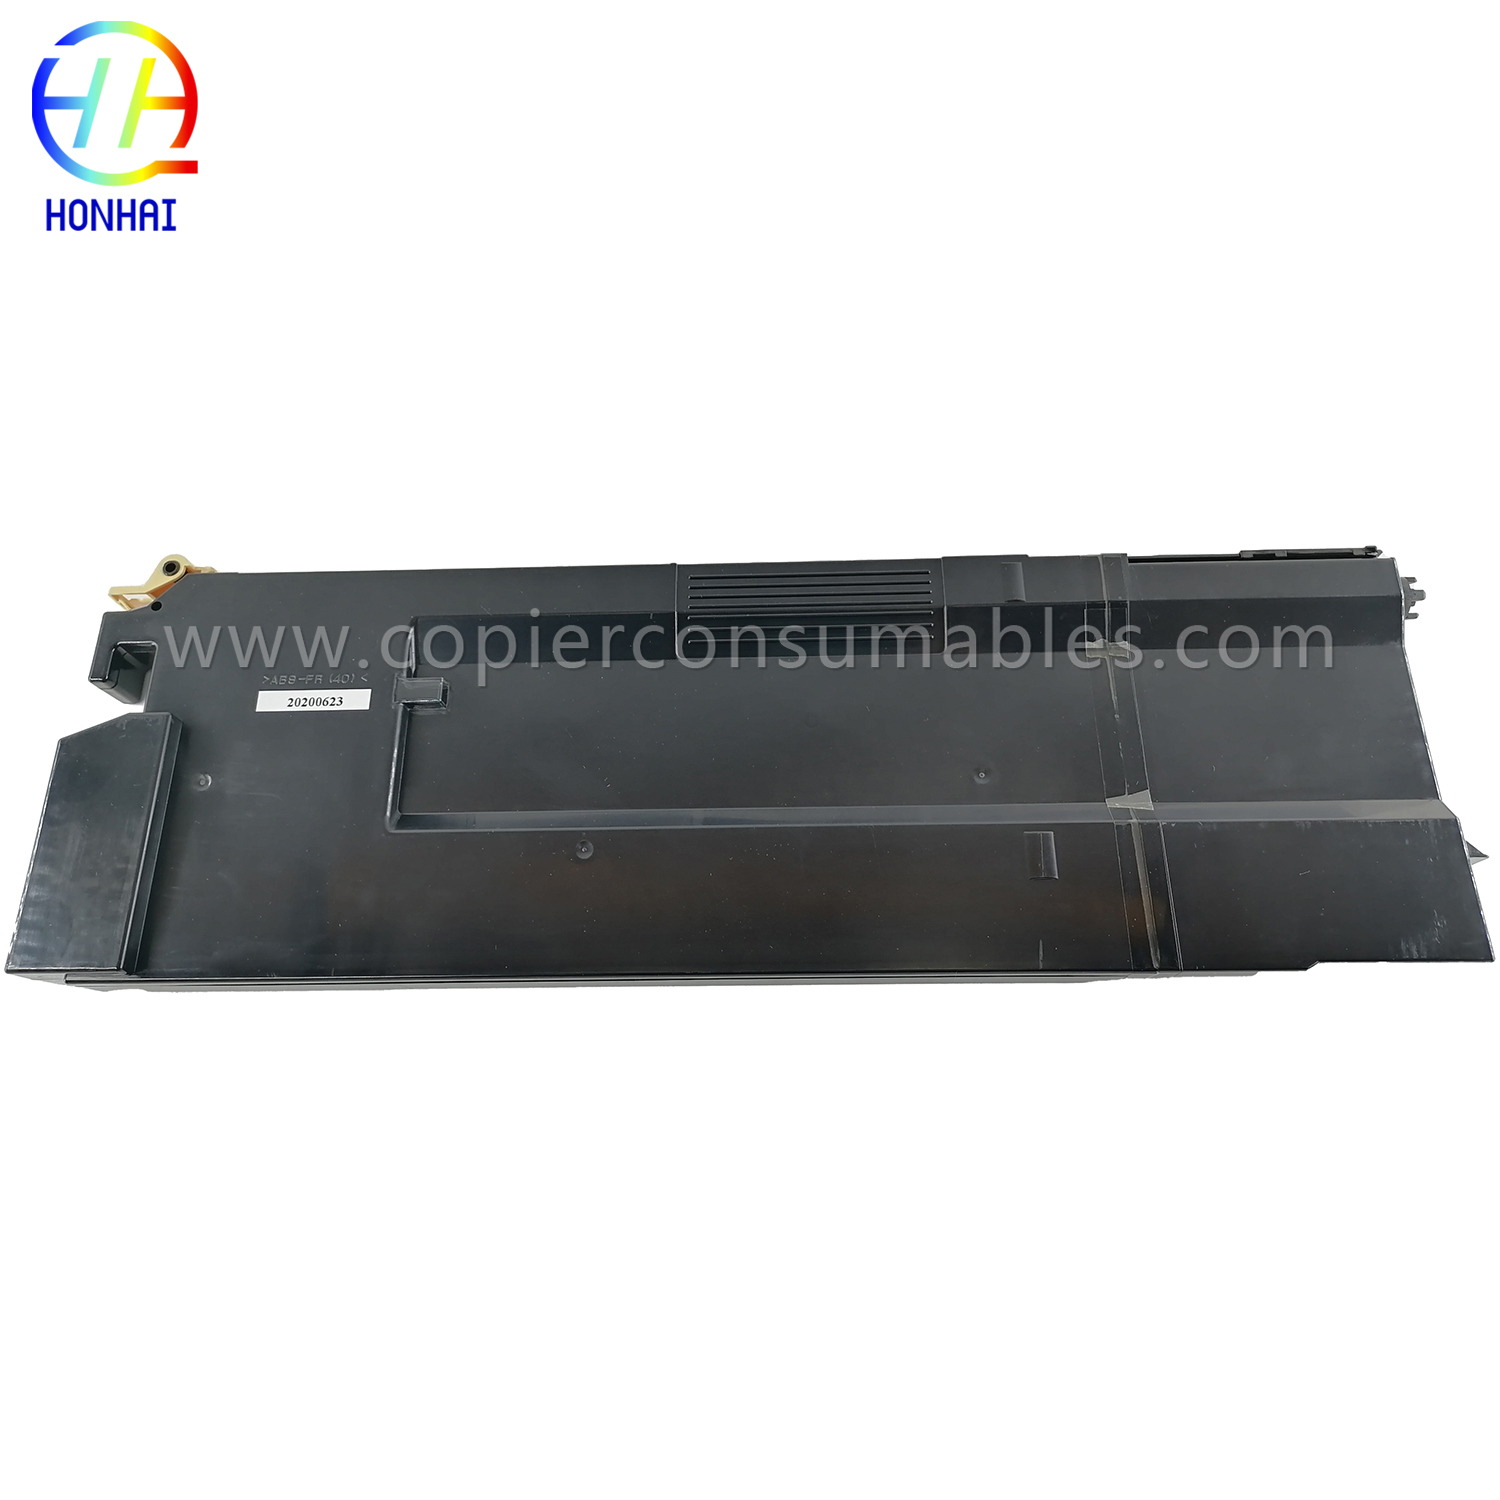 Waste Toner Container for Xerox 4110 4127 4590 4595 D110 D125 D136 D95 ED125 ED95A 008R13036